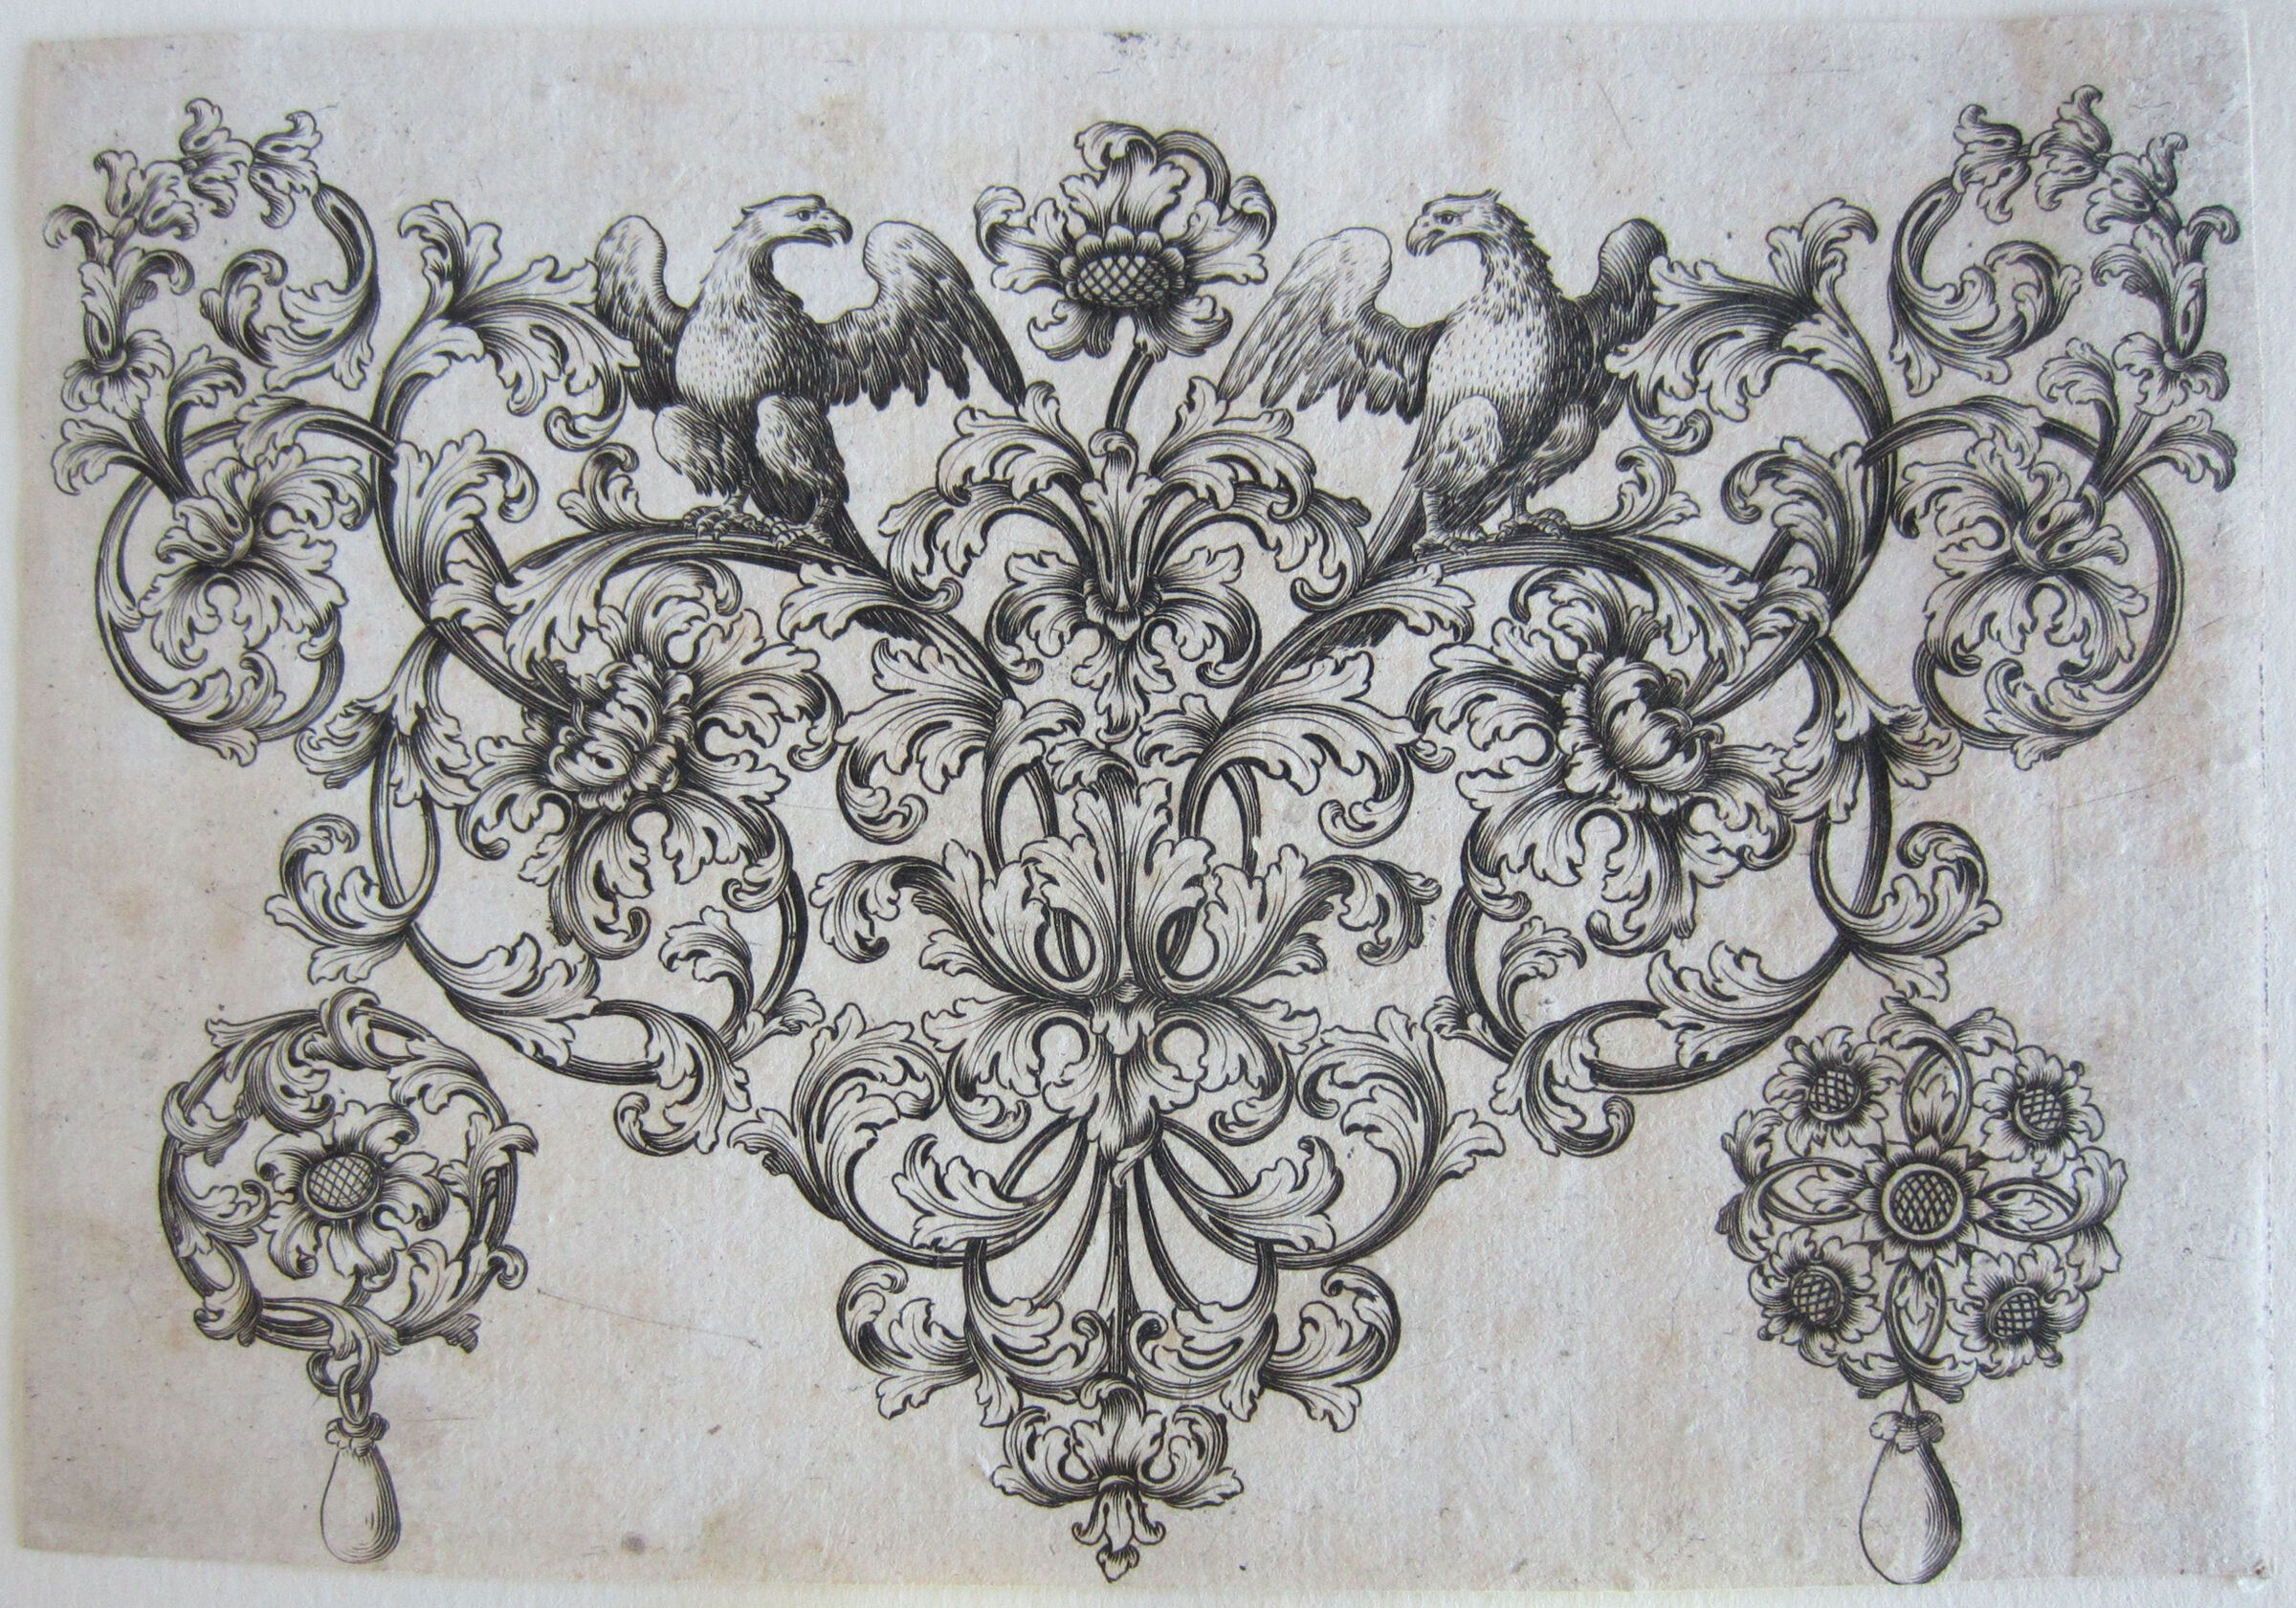 Foliate Design For A Breast Jewel And Earrings, A Blossom Flanked By Two Eagles On The Tip Of The Large Motif